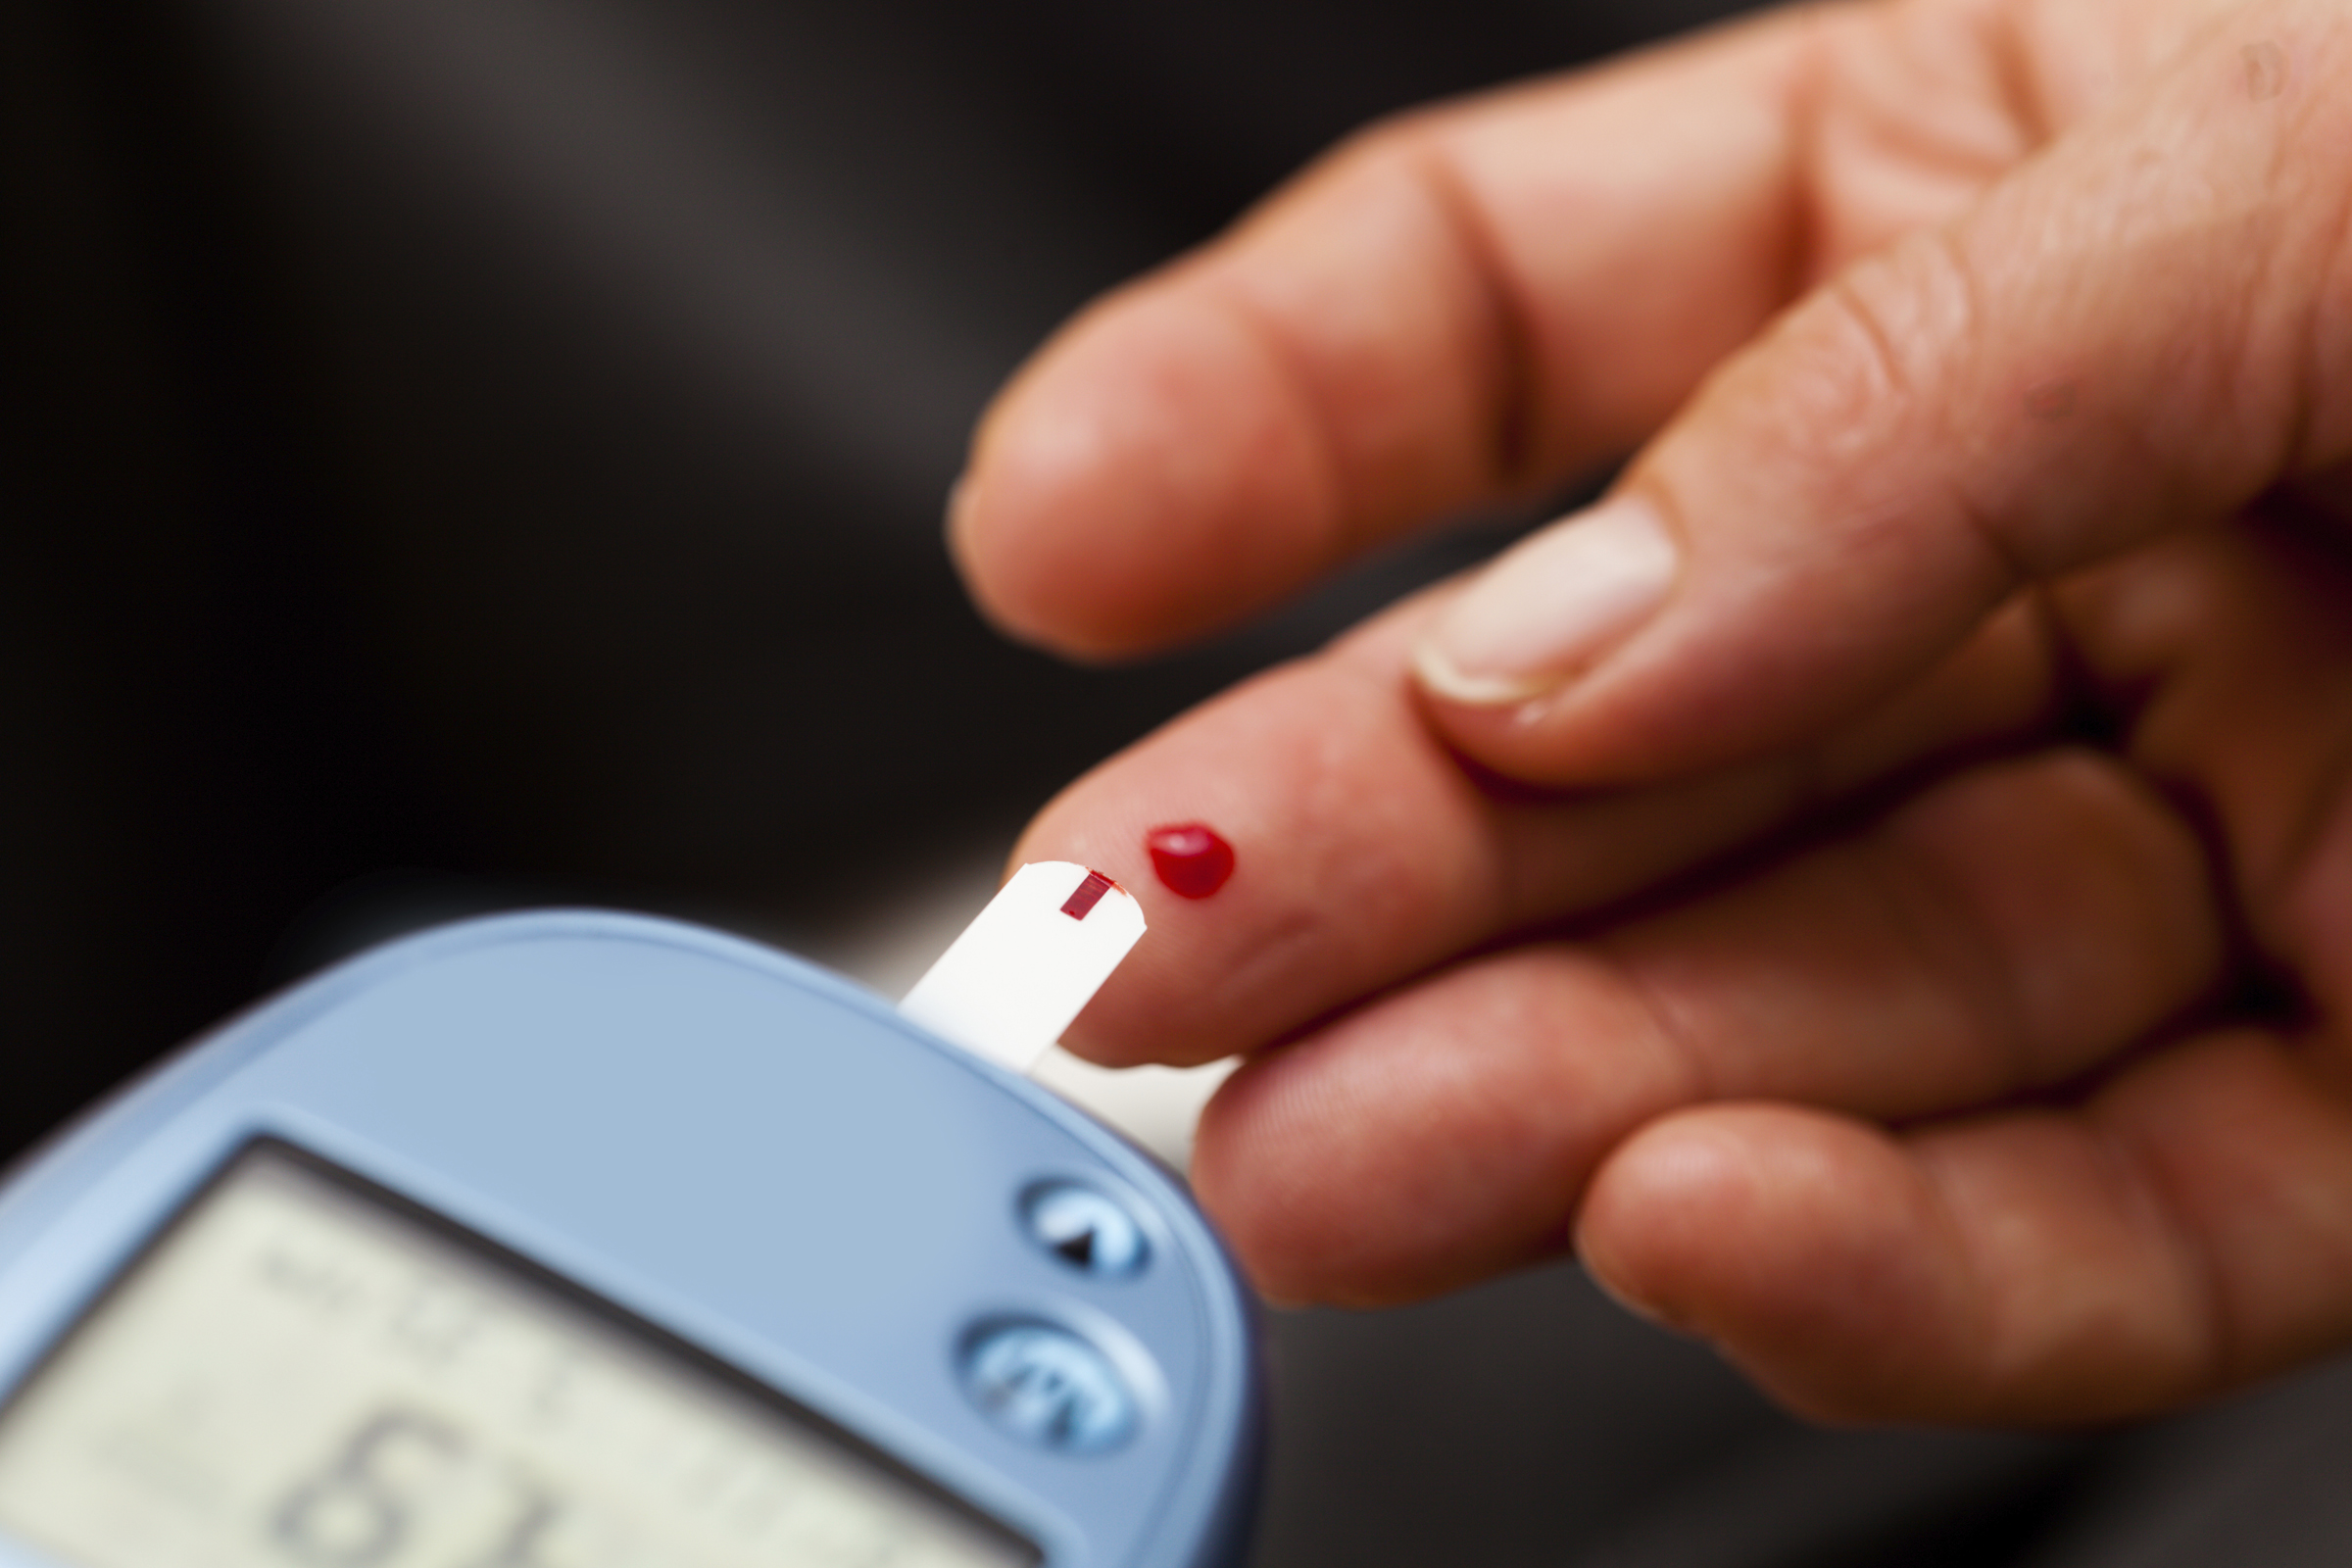 On the spot blood analysis provides immediate results to doctors and patients. 